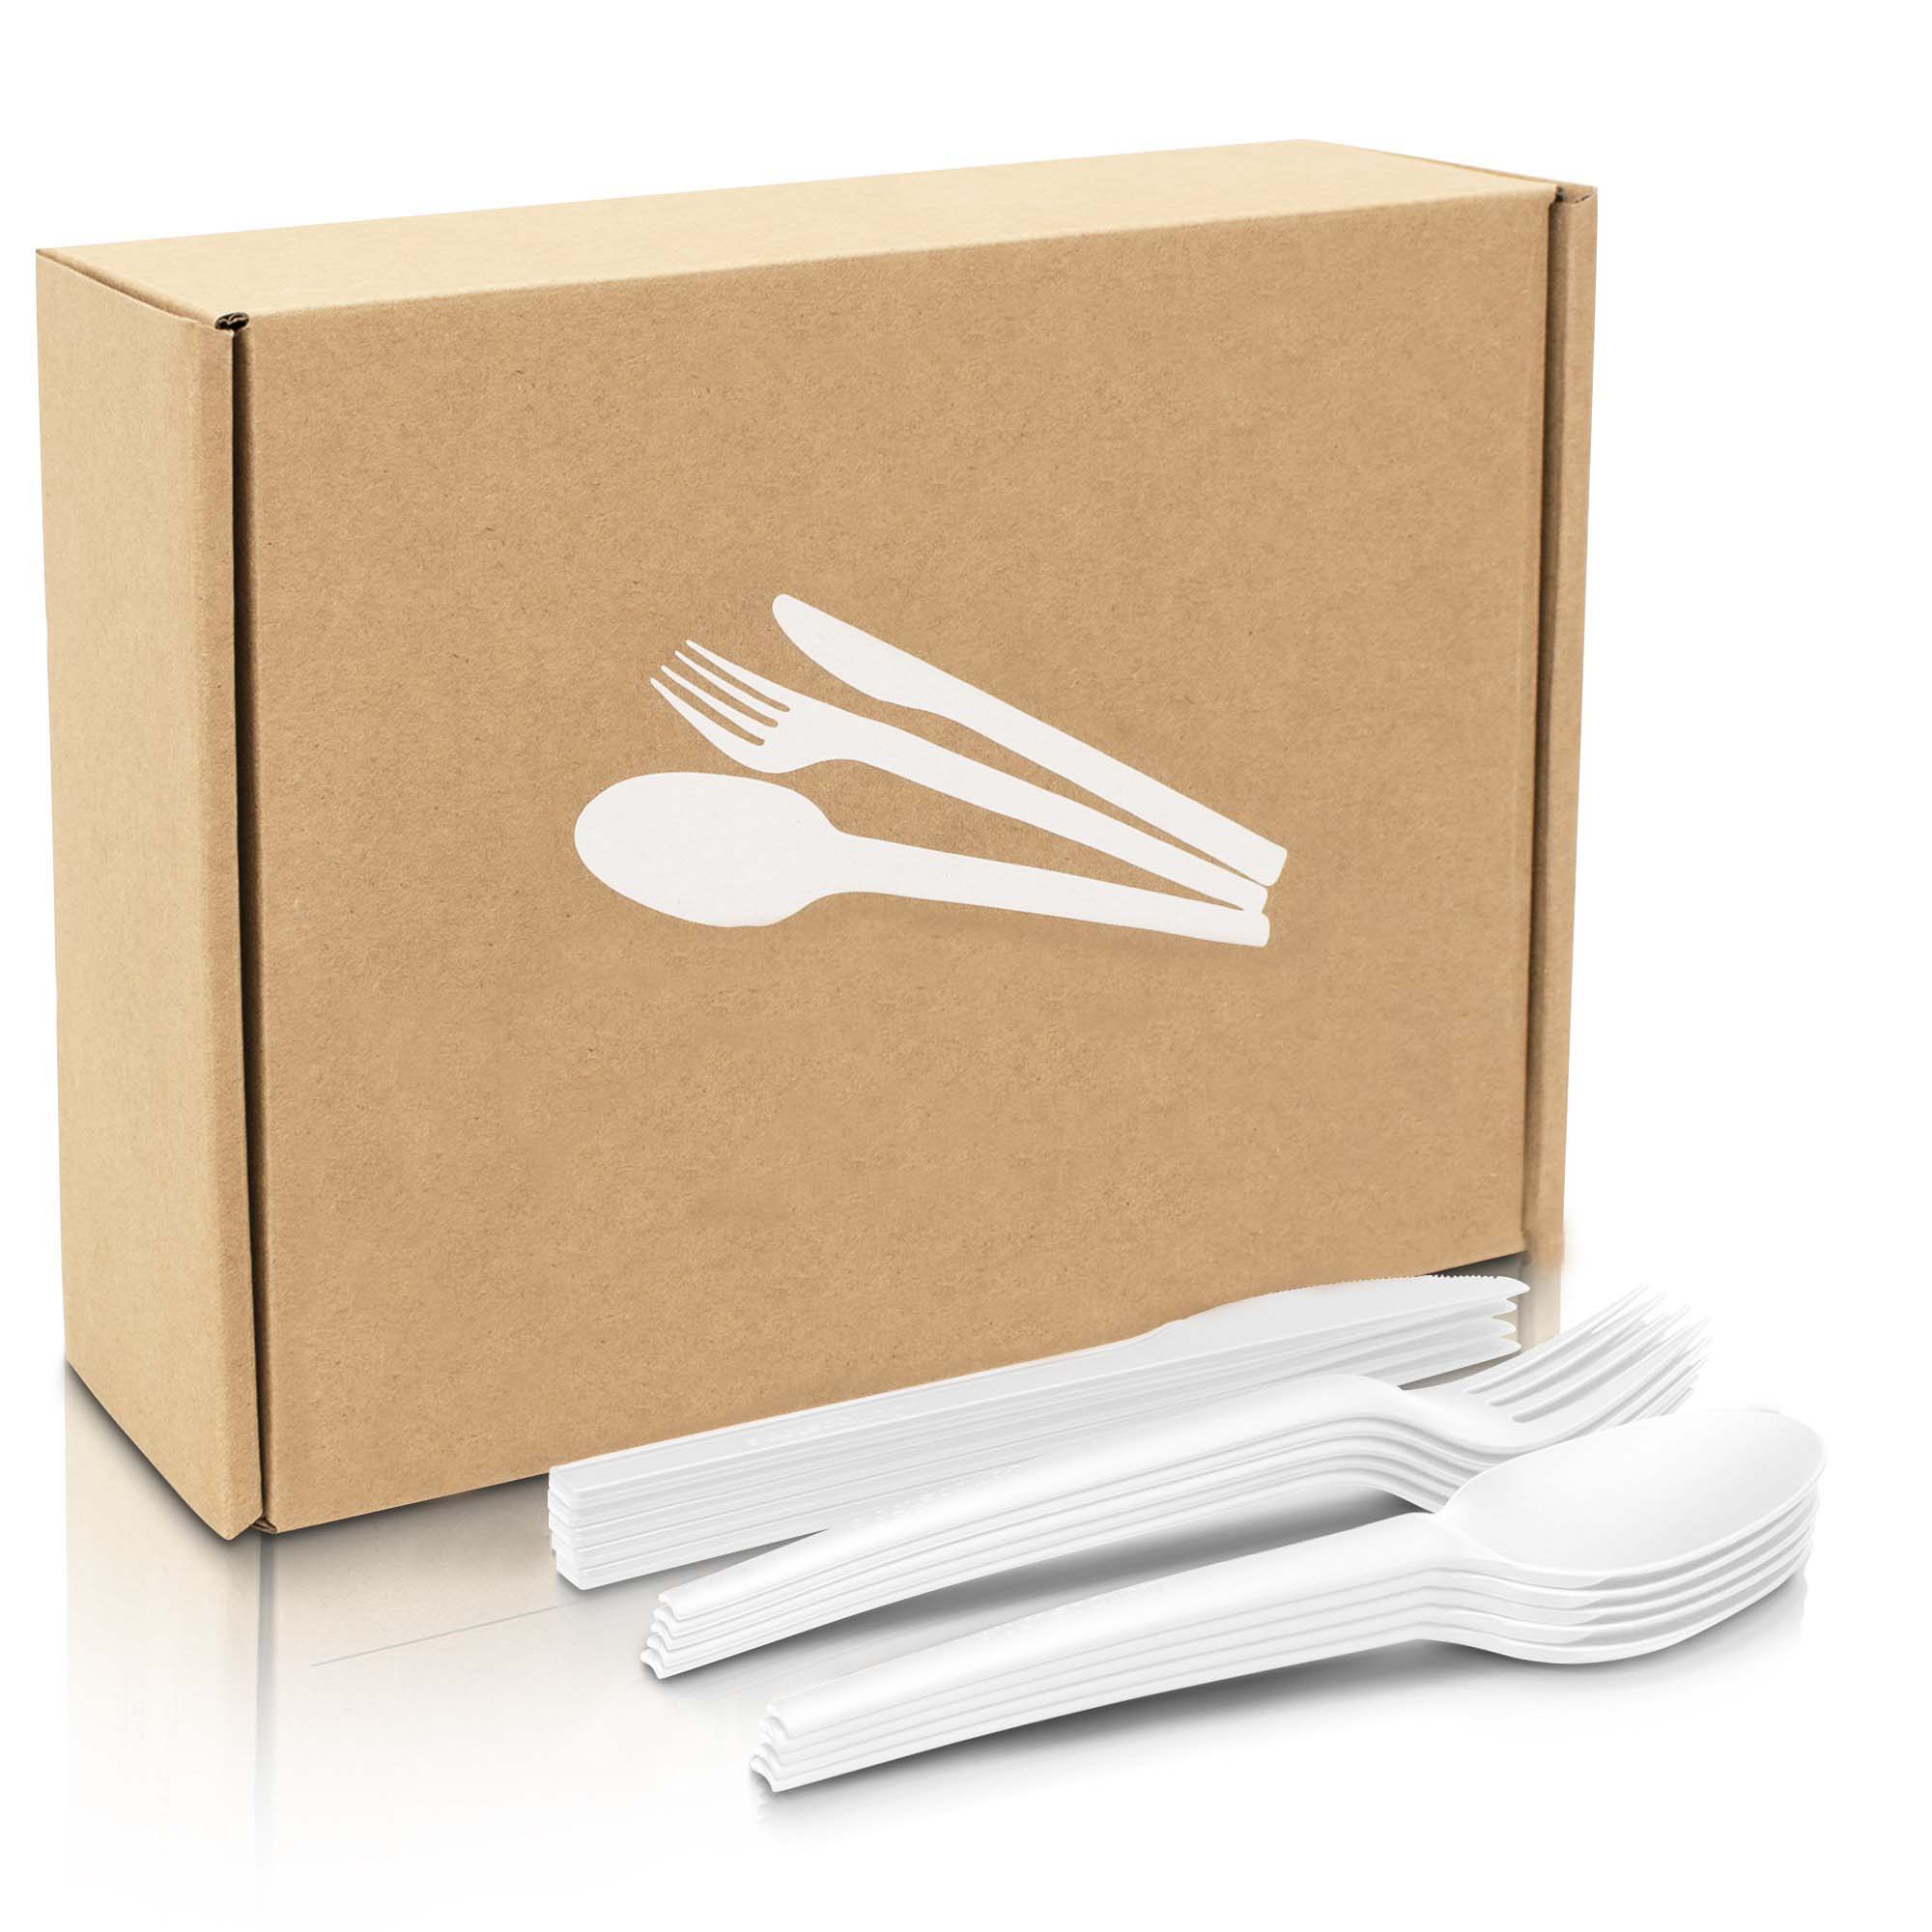  Quanhua 250 Pieces aircraft box biodegradable kitchen utensil Set 100 forks 100 knives 50 spoons compostable cutlery...